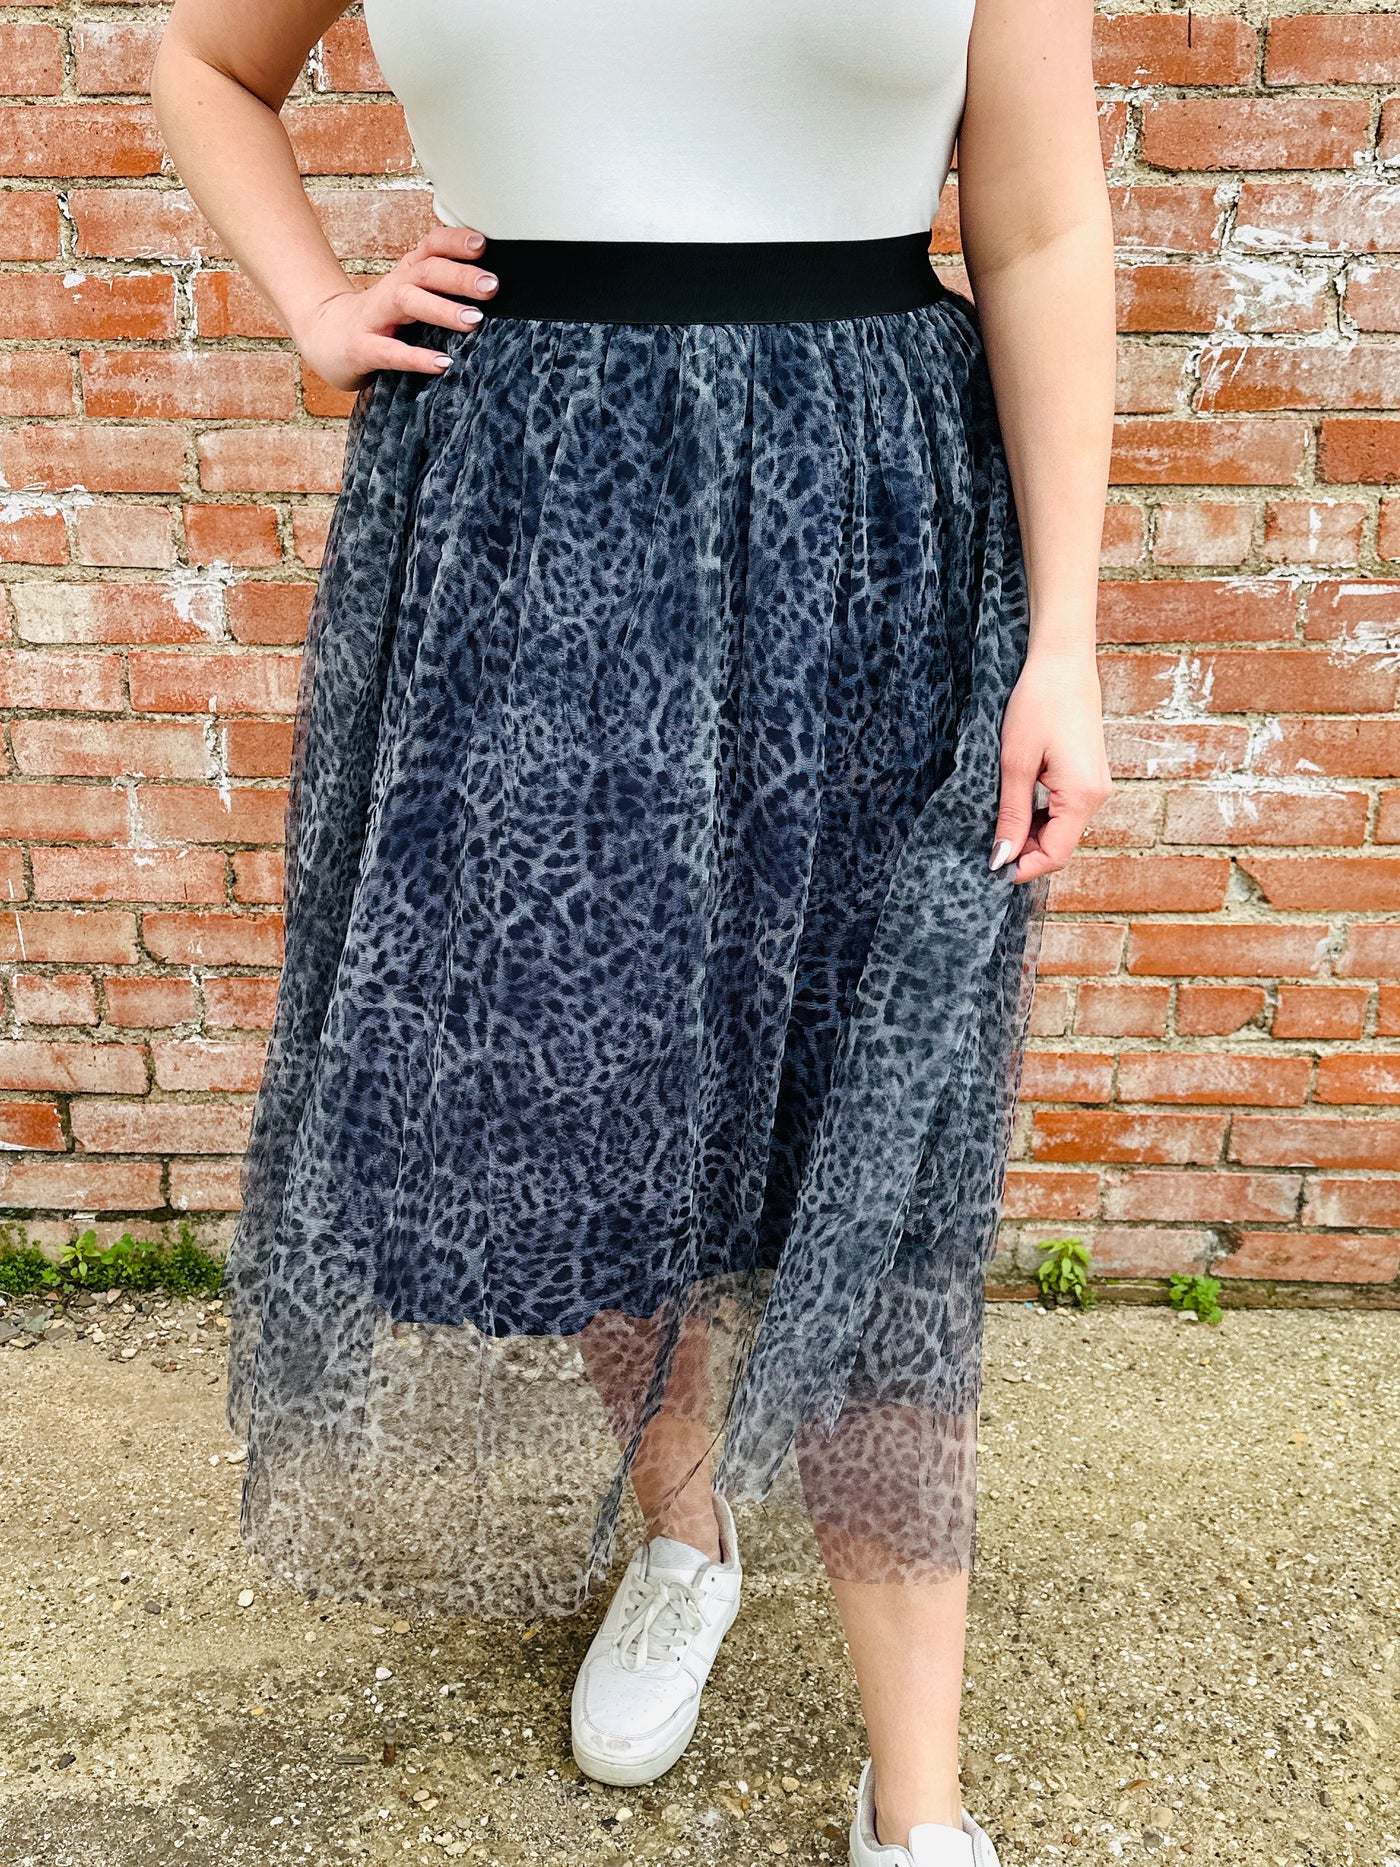 A Night Like Tonight Tulle Skirt • Black Leopard by-Oddi-Shop Anchored Bliss Women's Boutique Clothing Store